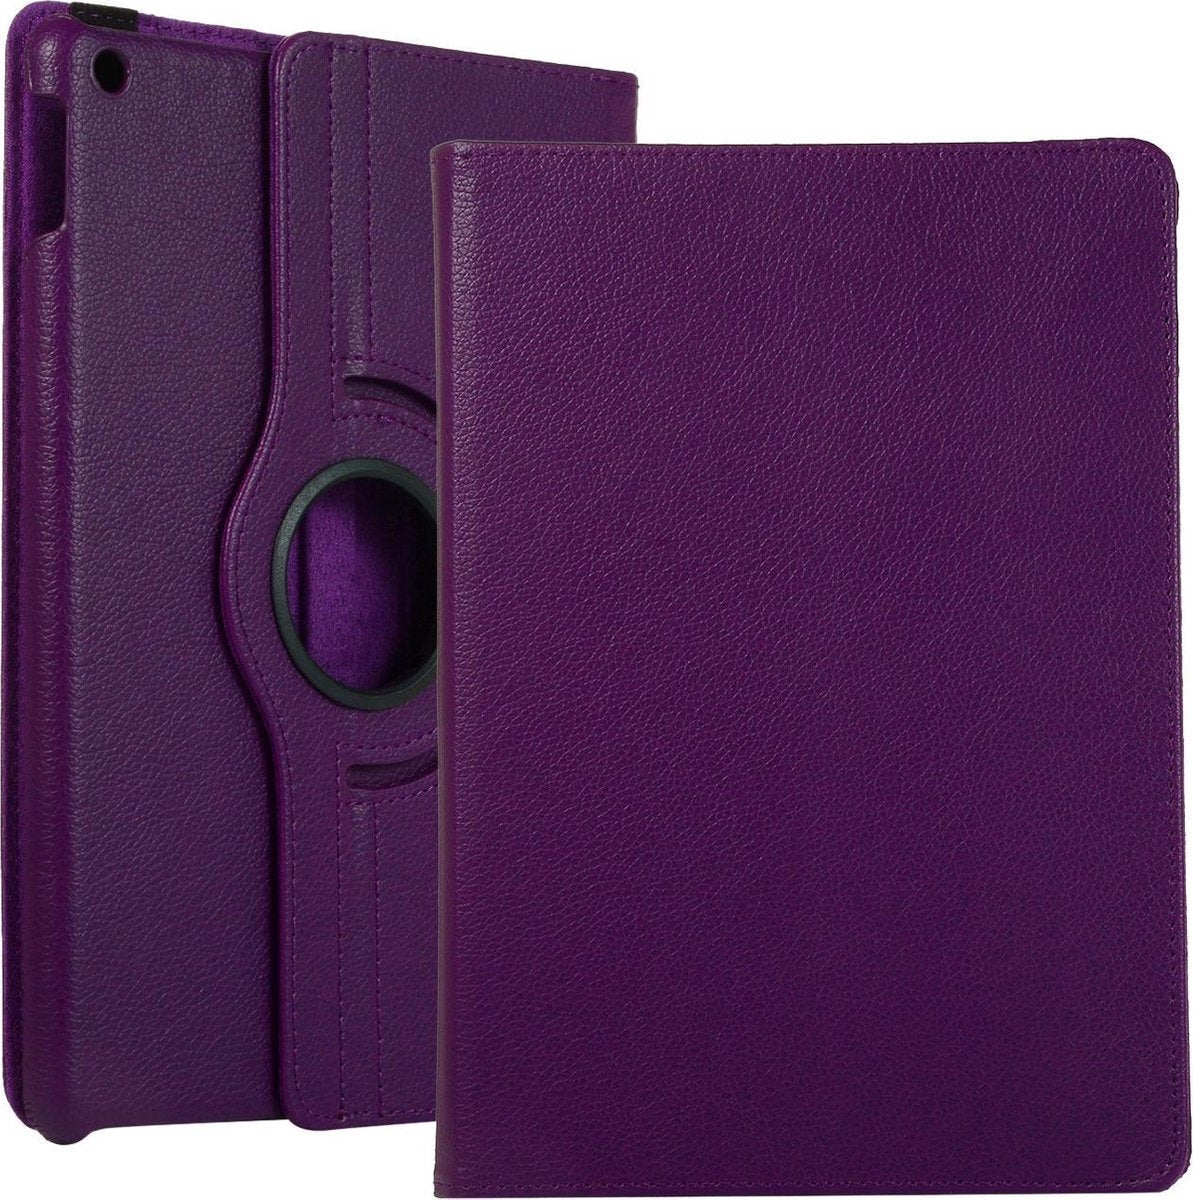 TechProtect 360 for iPad Pro 10.5” & Air 3 - Purple